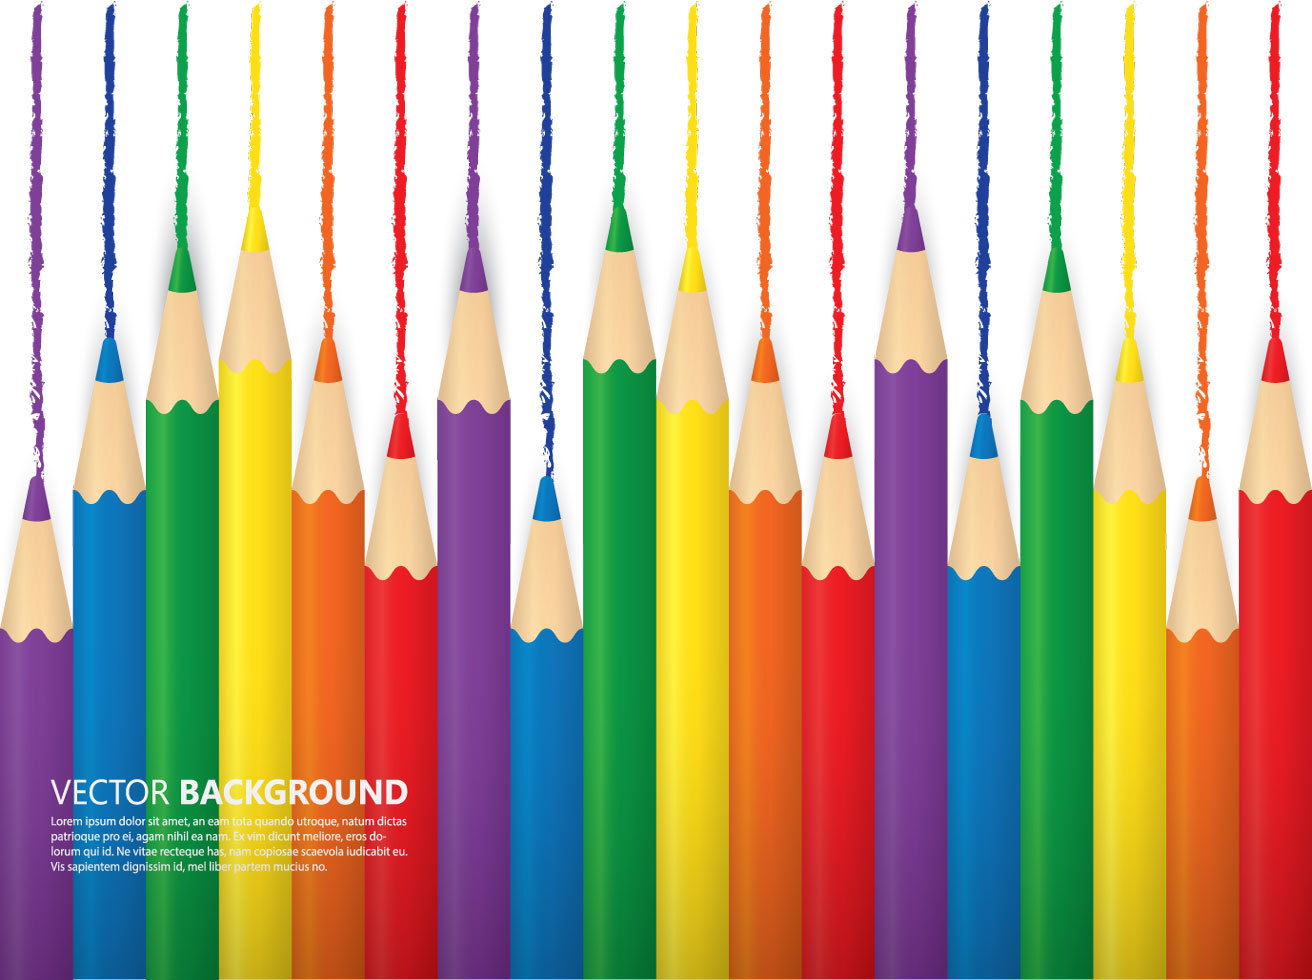 Colored Pencil Background Vector Art & Graphics | freevector.com